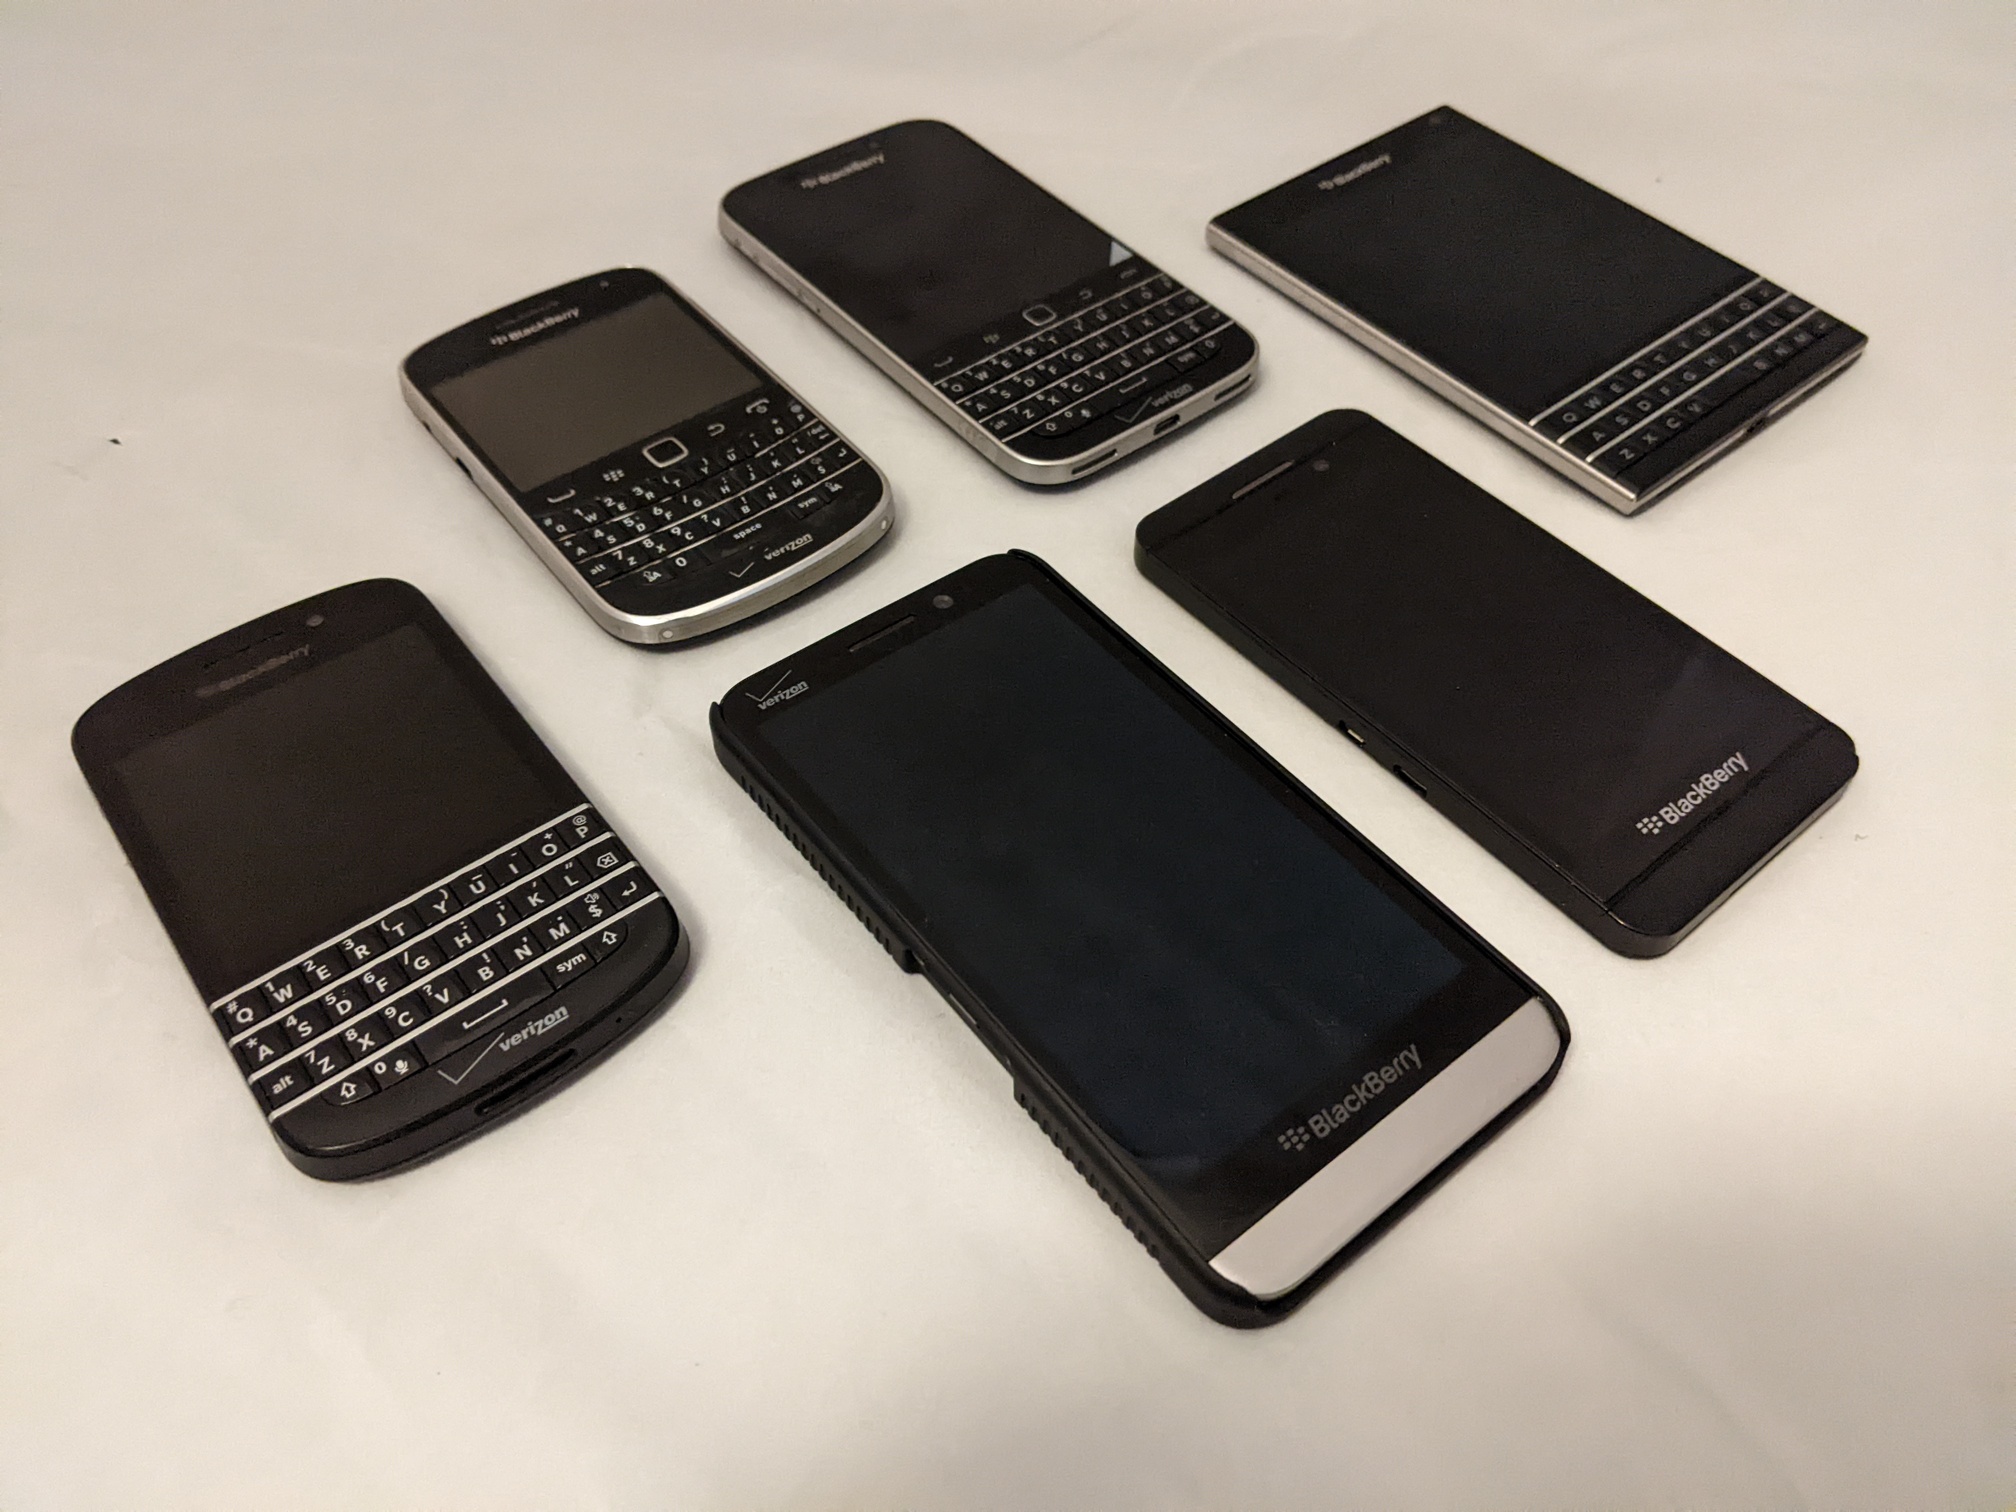 A collection of BlackBerry devices